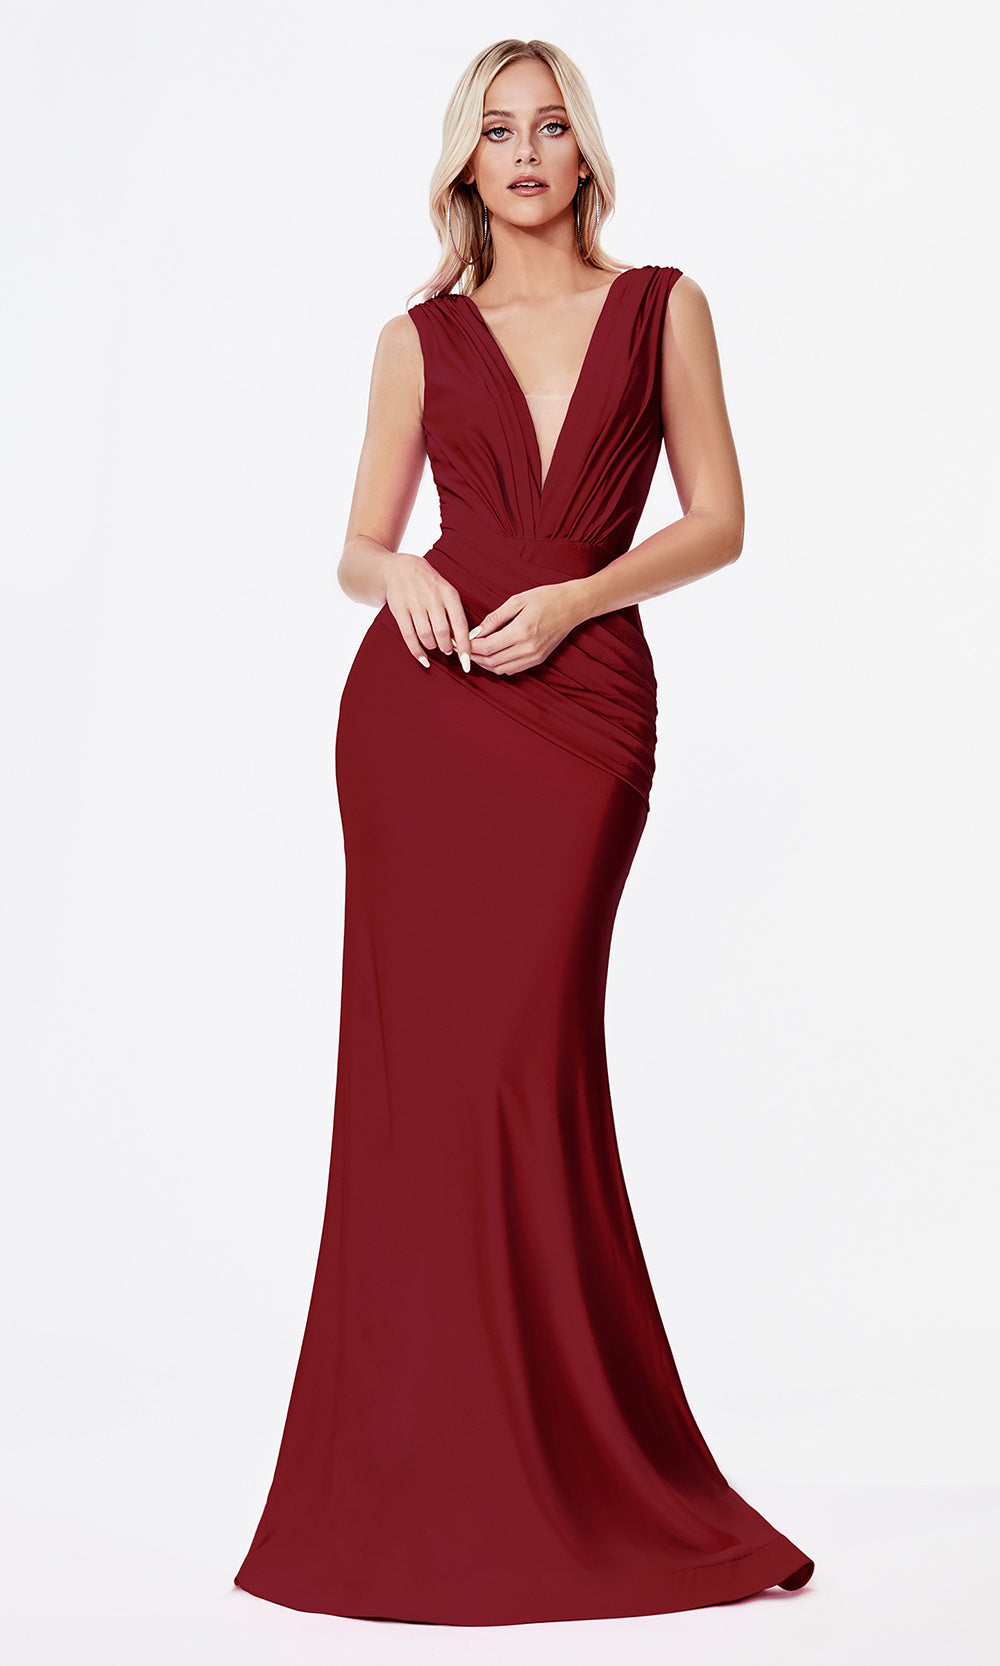 Cinderella Divine CD912 burgundy v neck fitted dress w/wide straps. Perfect dark red/maroon dress for prom, engagement shoot, bridesmaids, indowestern gown, black tie event, gala, pageant, formal party dress, wedding guest dress. Plus sizes avail.jpg